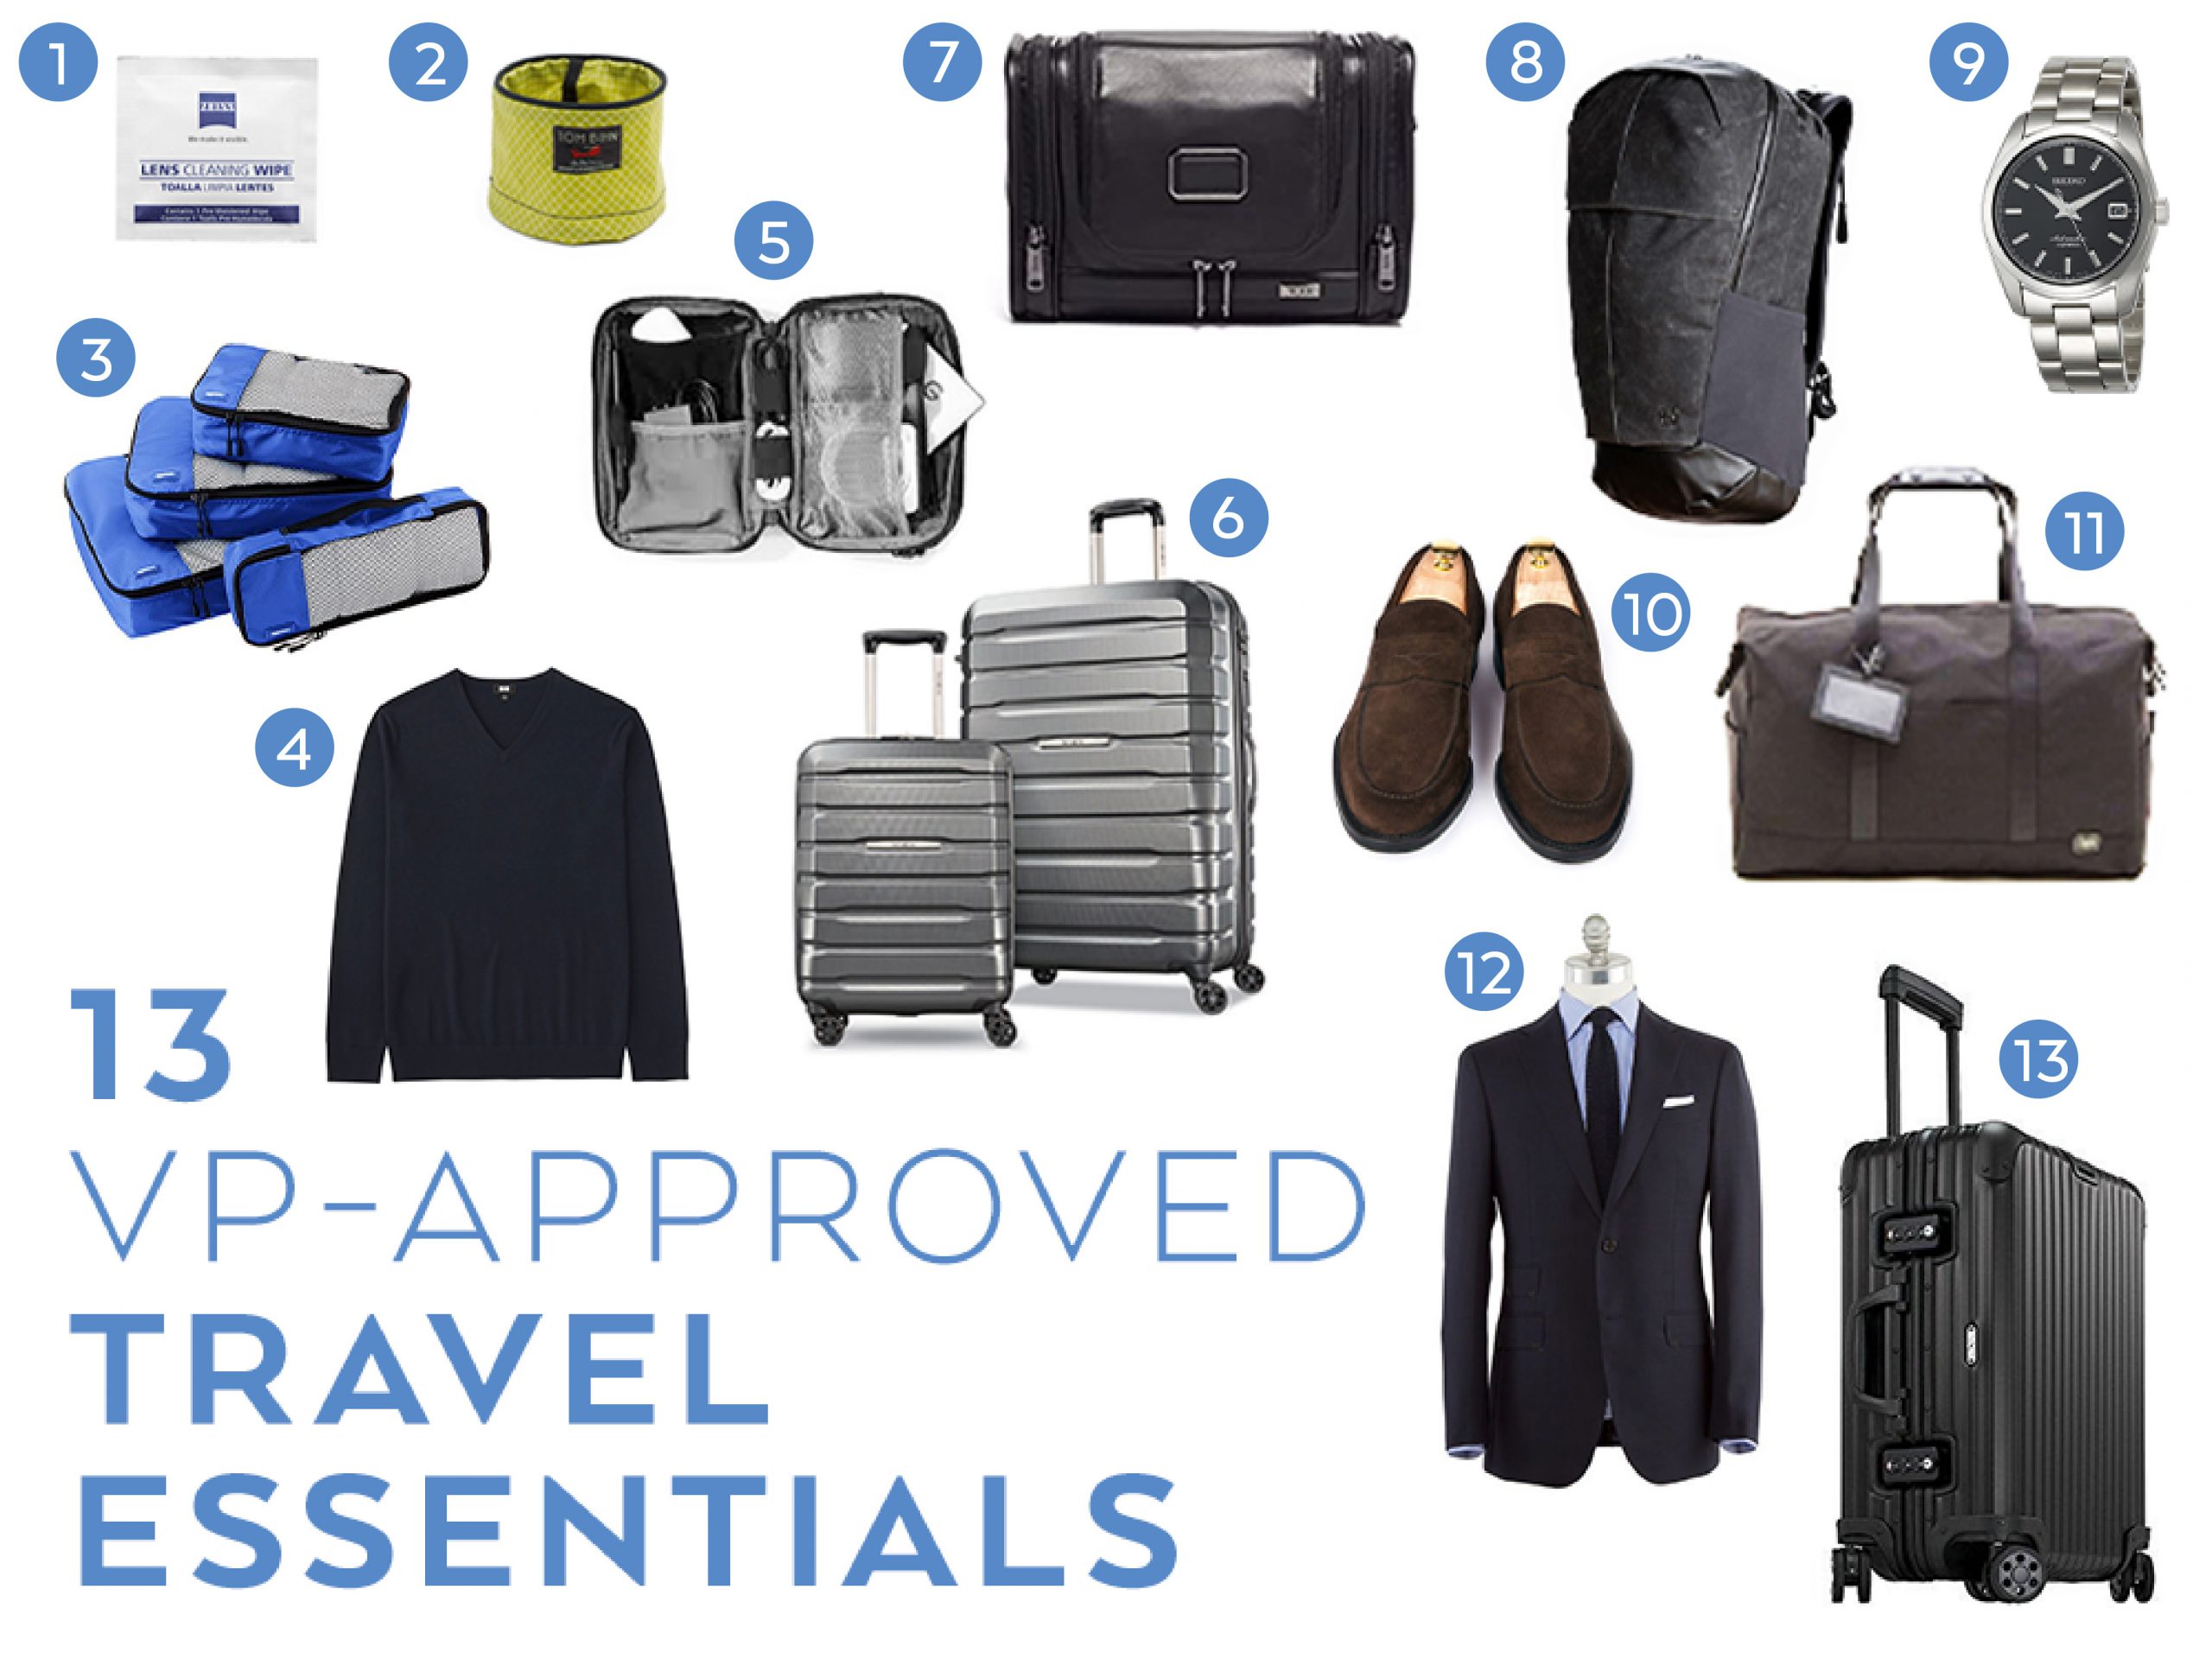 A VP's Ultimate Packing List – 13 Travel Bag Essentials - Unpacked